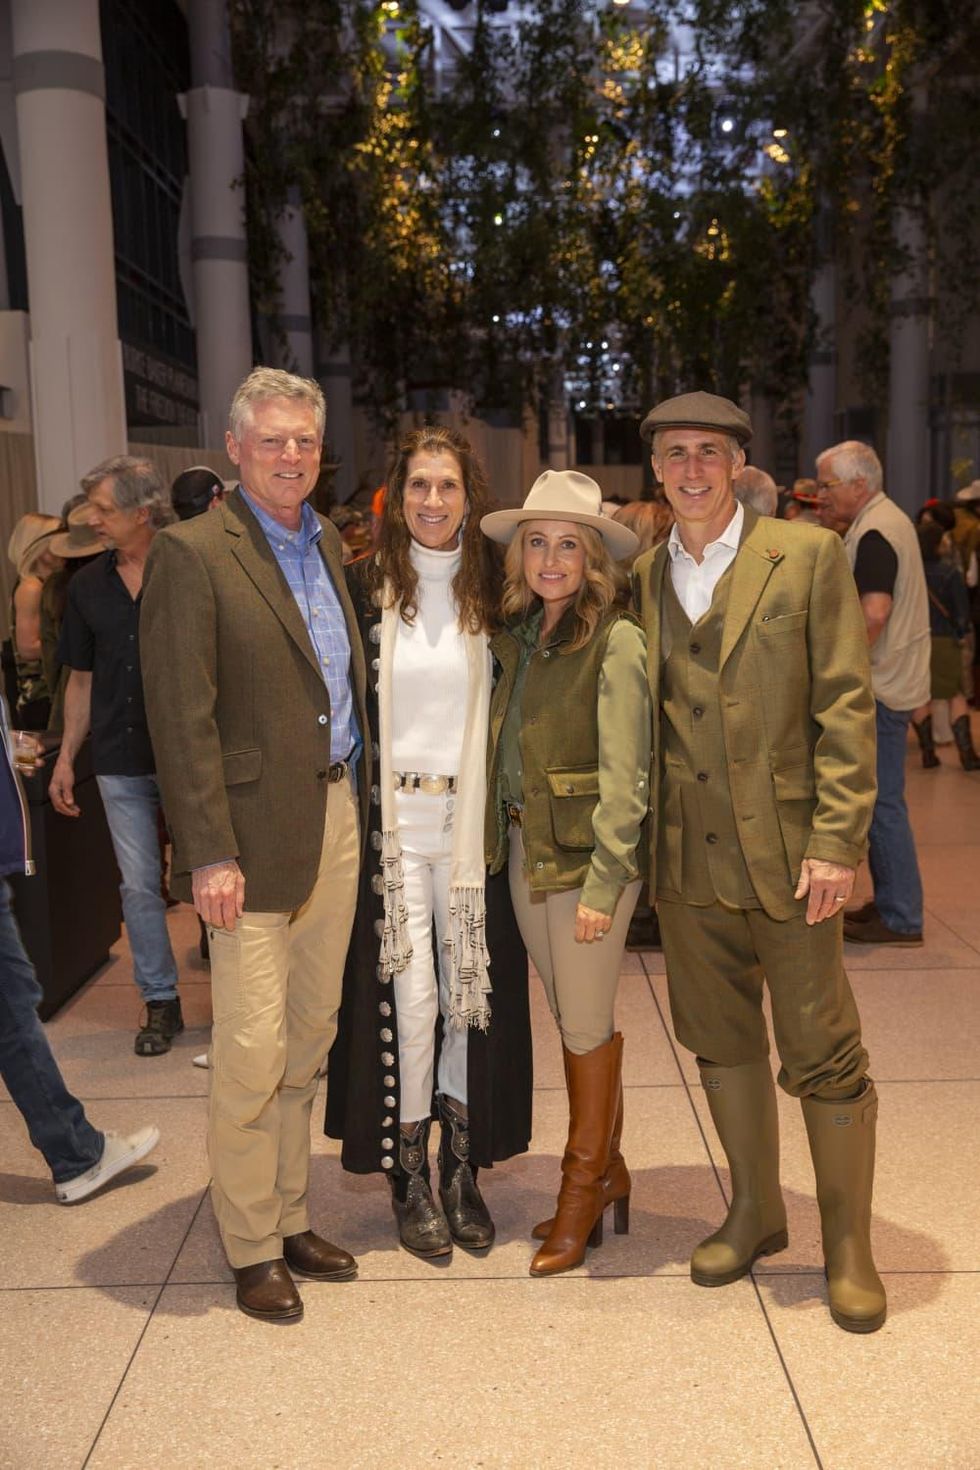 Houstonians gear up for the great outdoors in 2 million HMNS gala